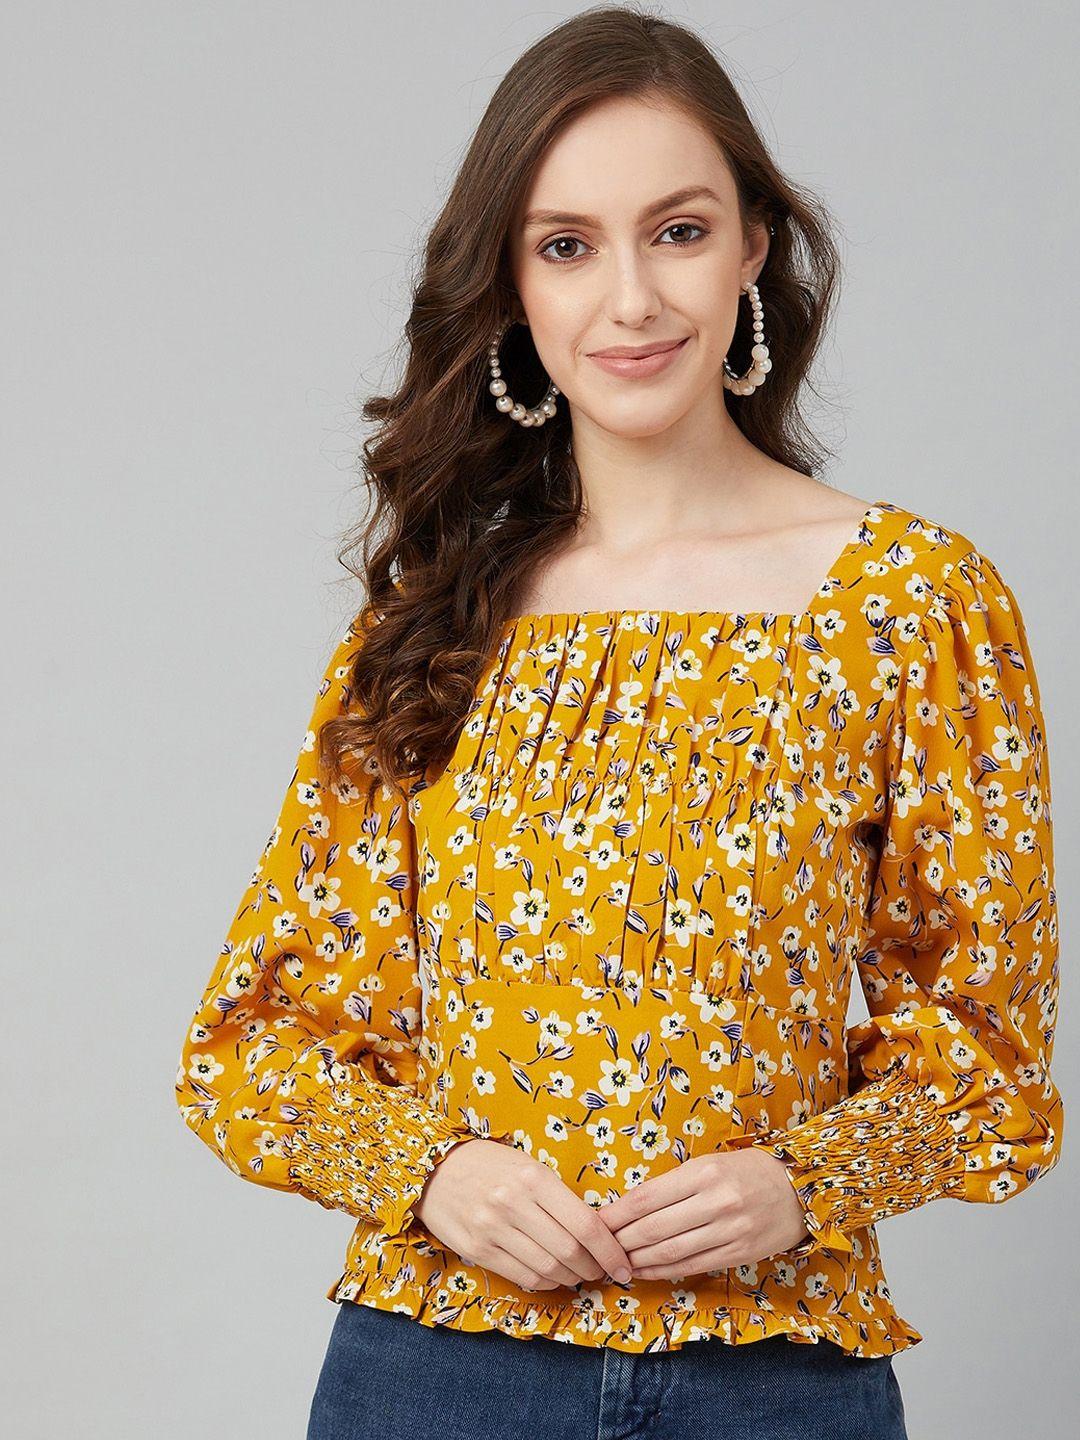 marie claire mustard floral printed puff sleeves crepe blouson top